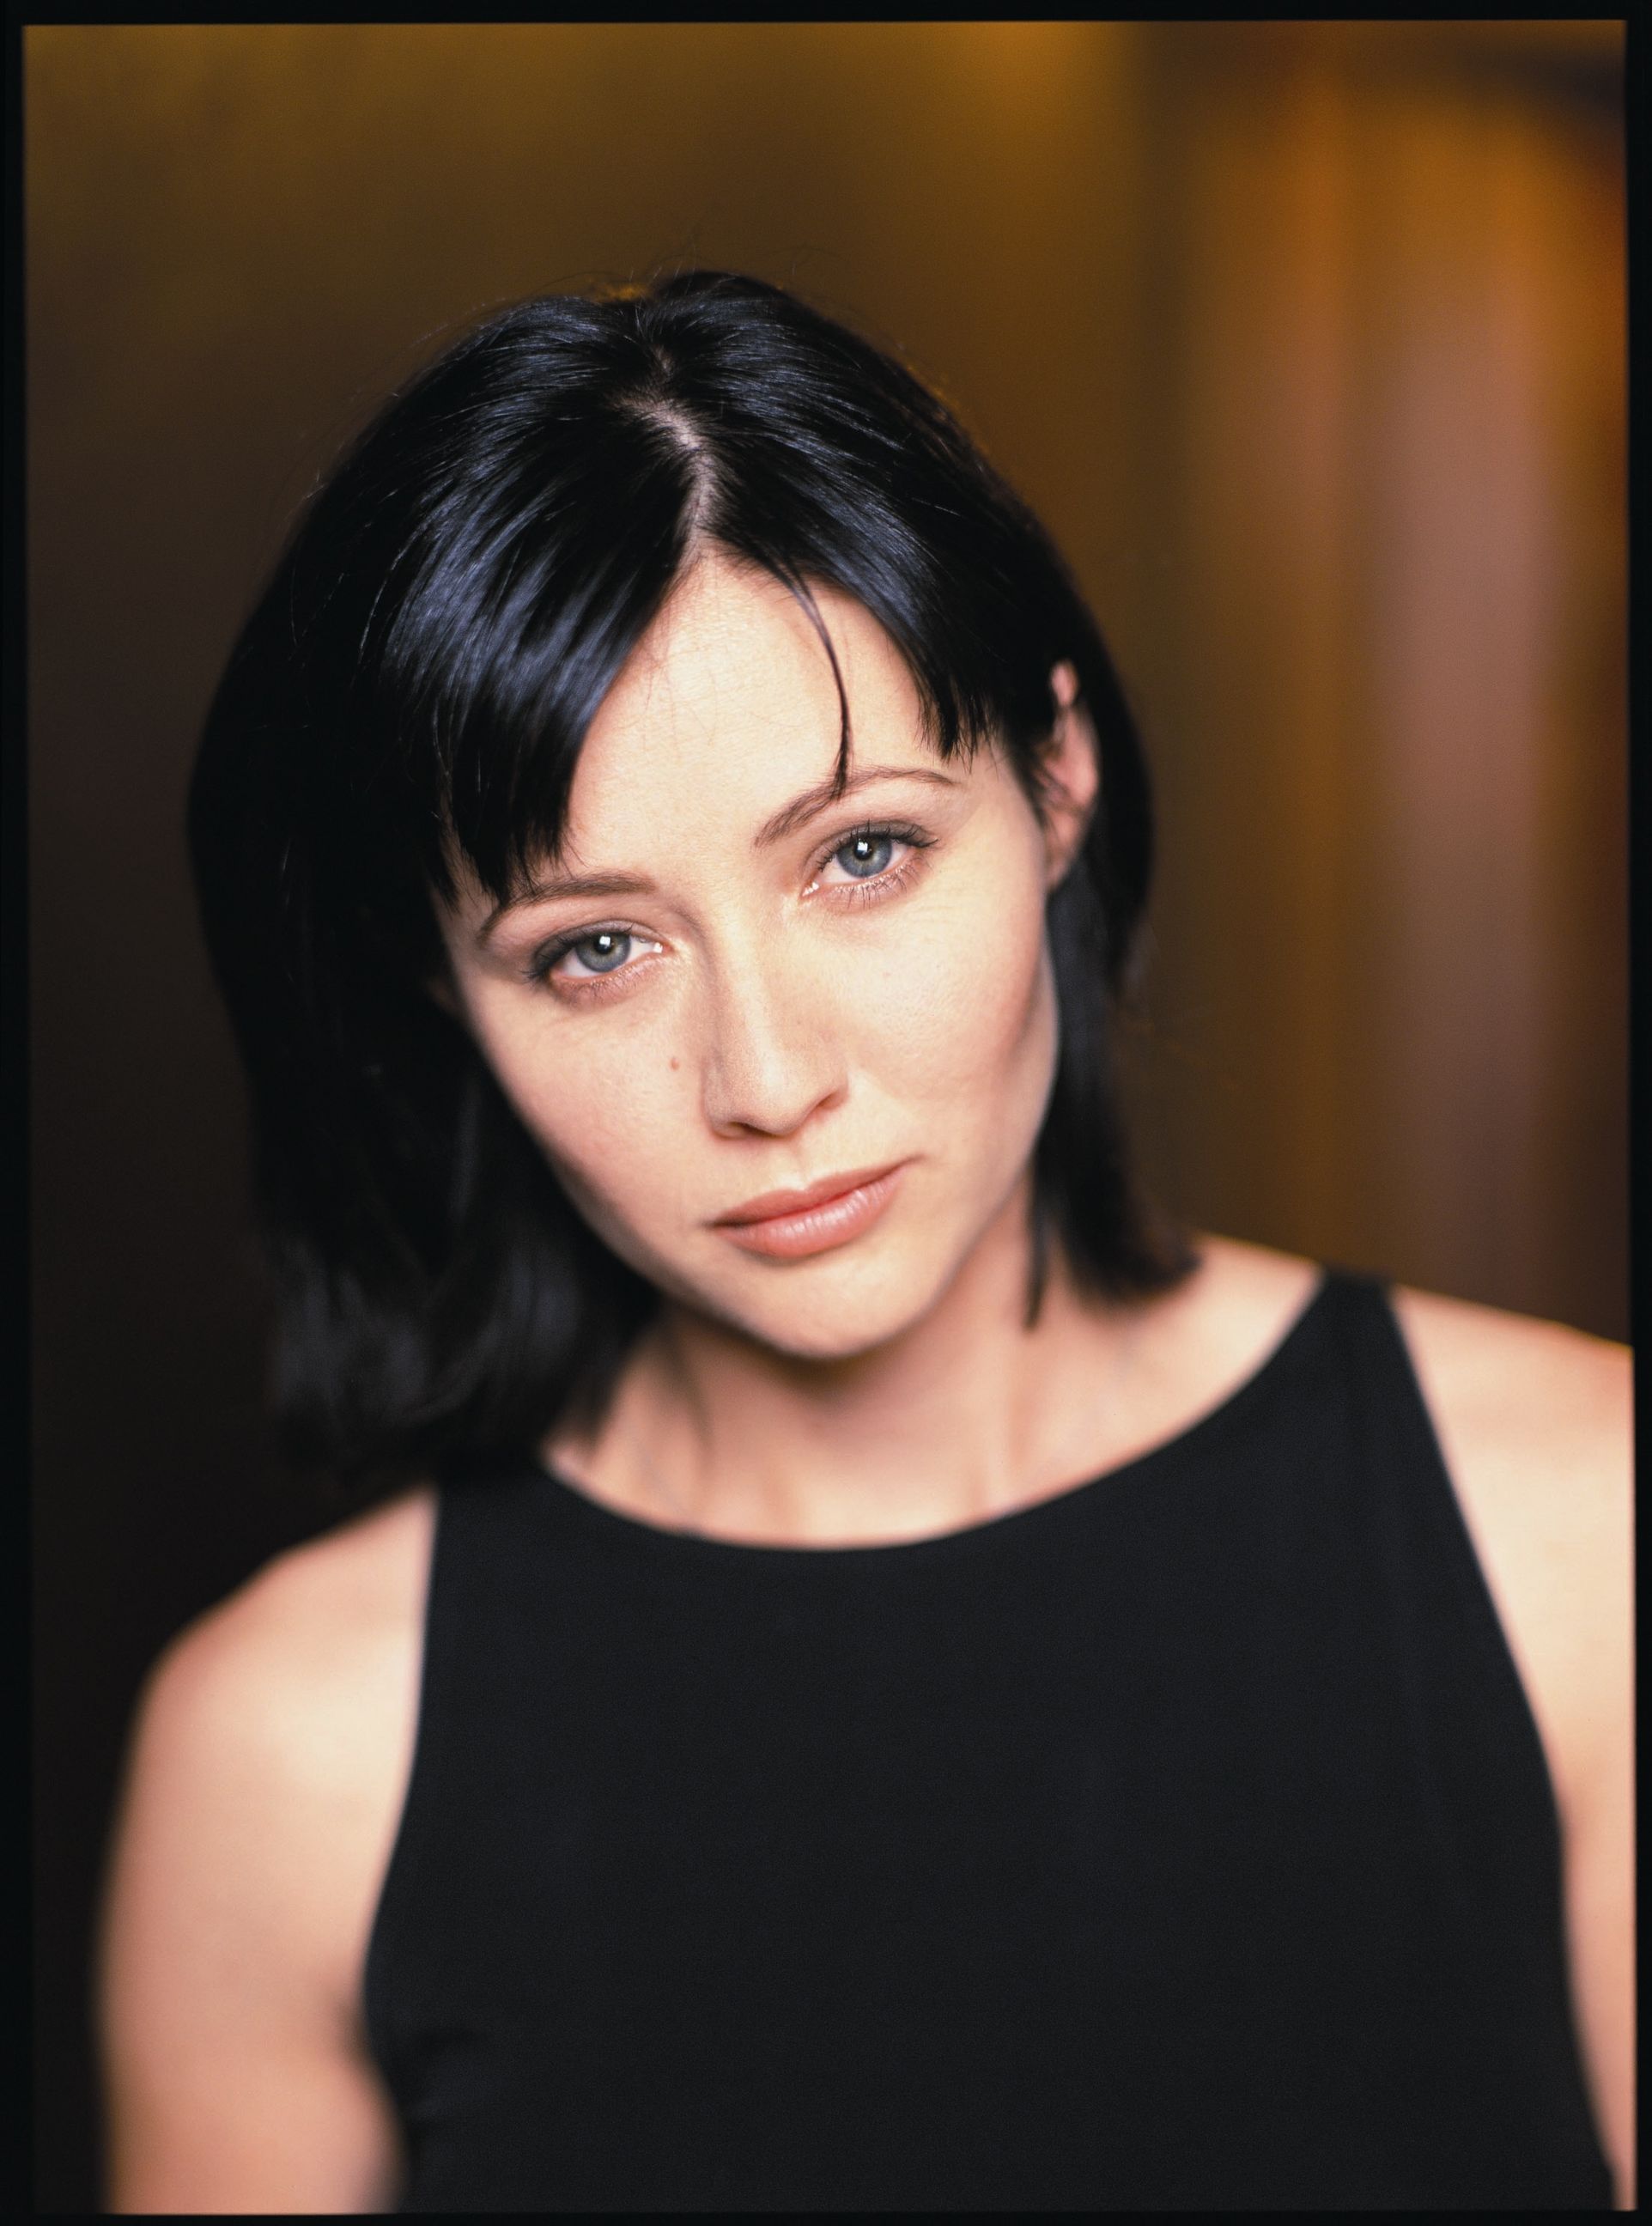 shannen-doherty-house